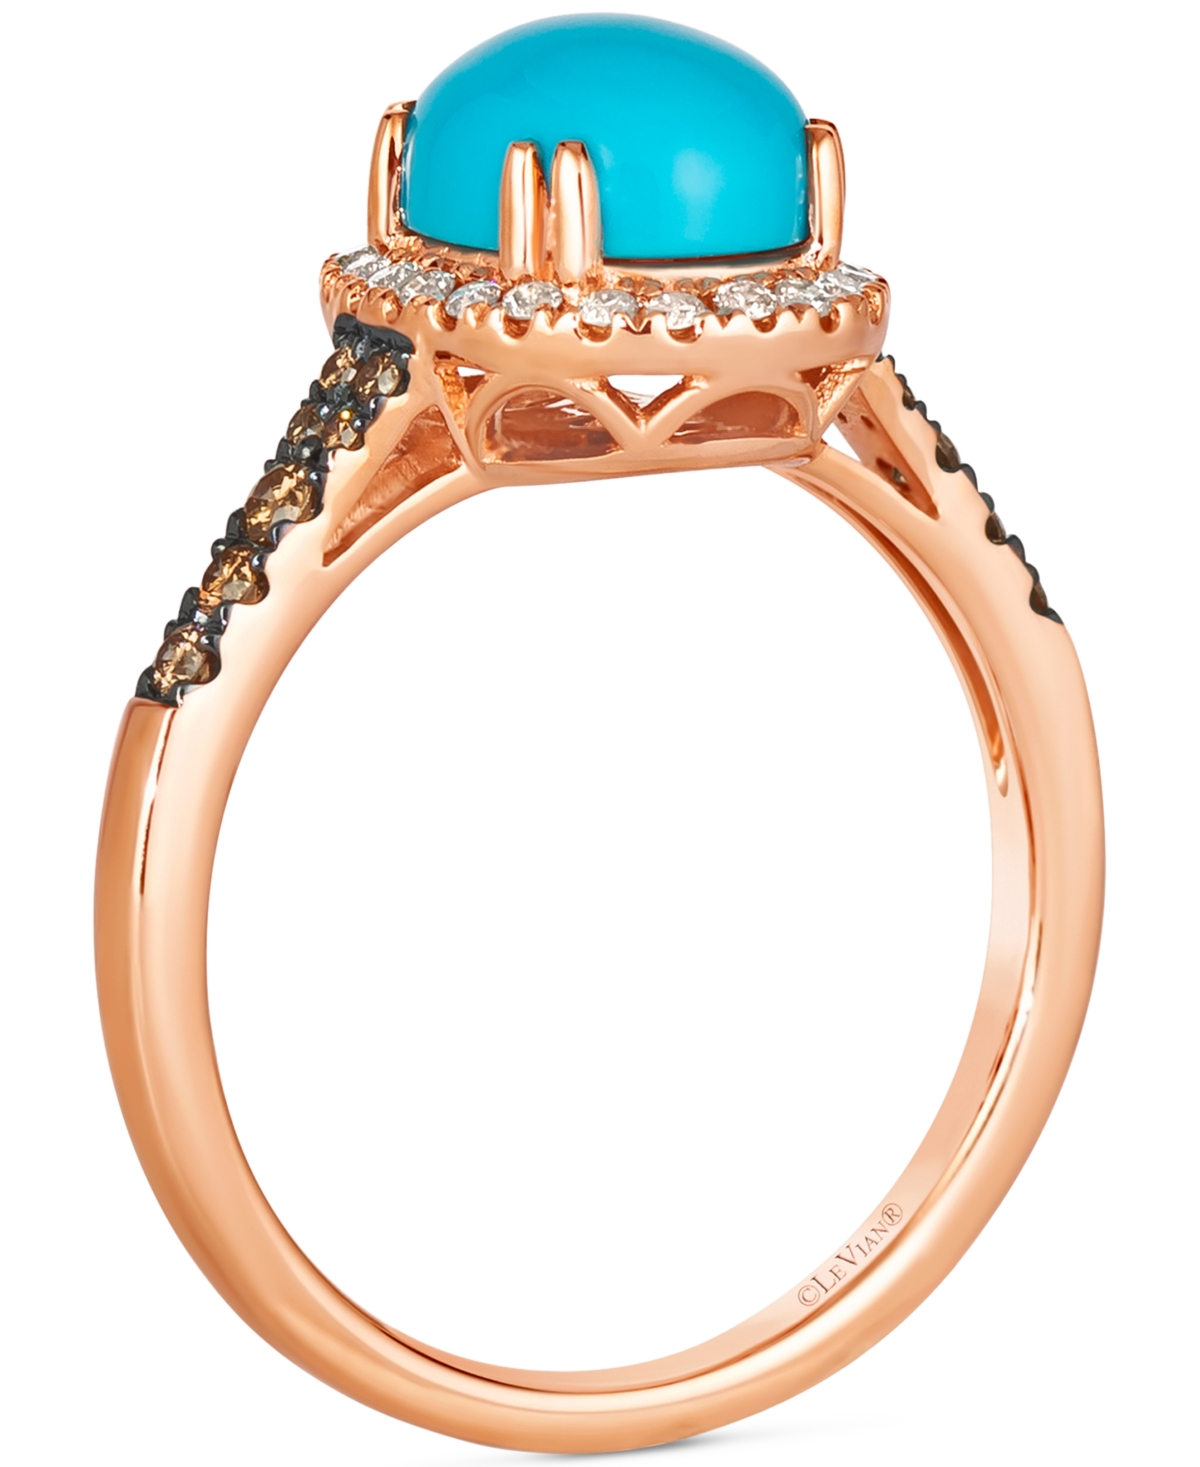 Shop Le Vian Robins Egg Blue Turquoise (2 Ct. T.w.) & Diamond (1/3 Ct. T.w.) Halo Ring In 14k Rose Gold In K Rg